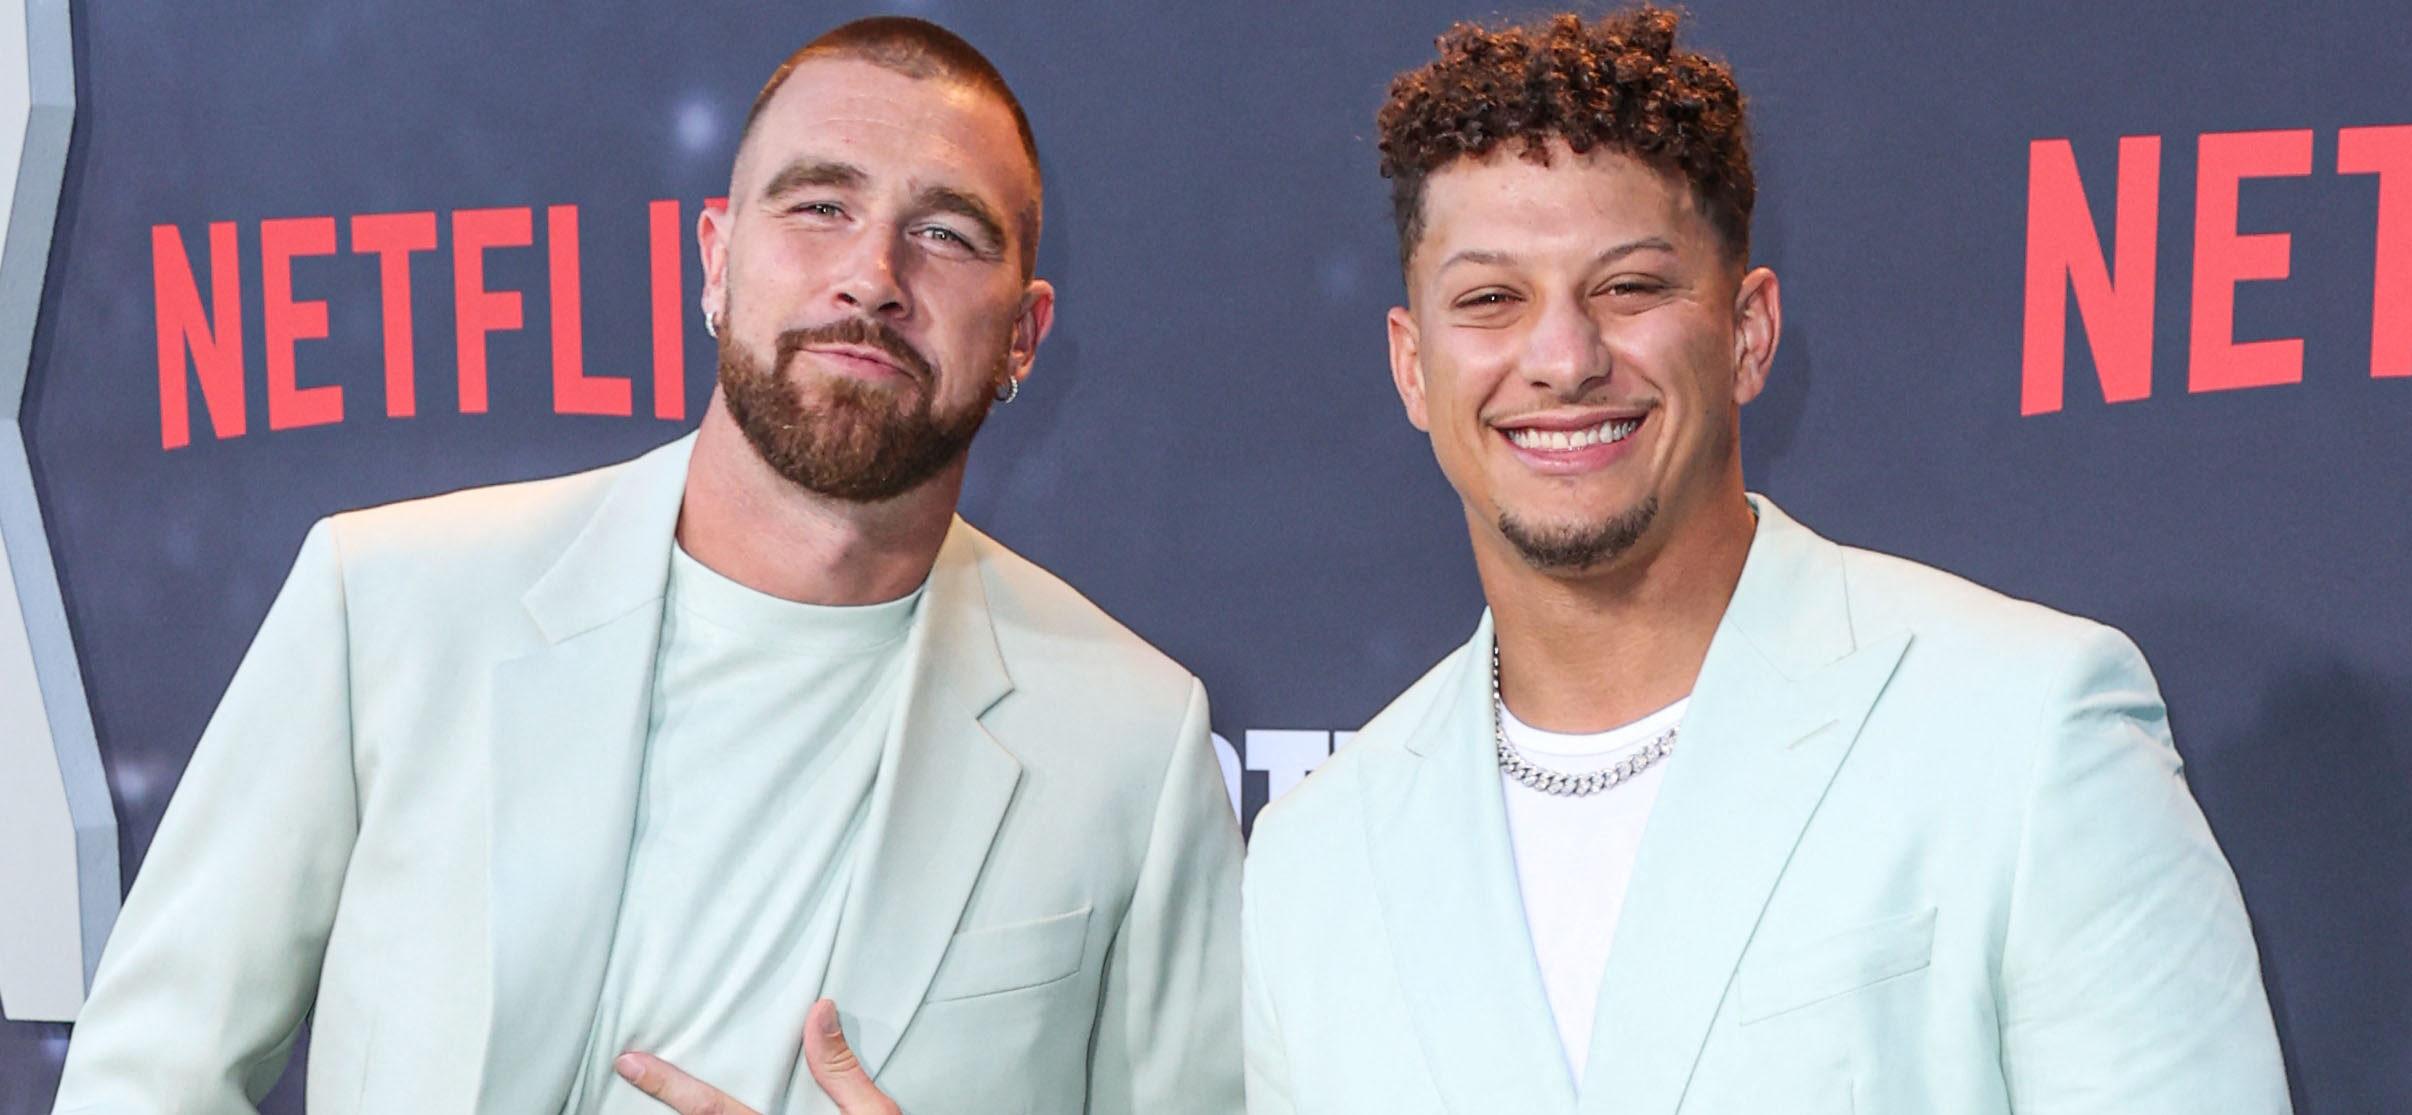 Patrick Mahomes Dumps Water On Travis Kelce In -7°F Weather [VIDEO]